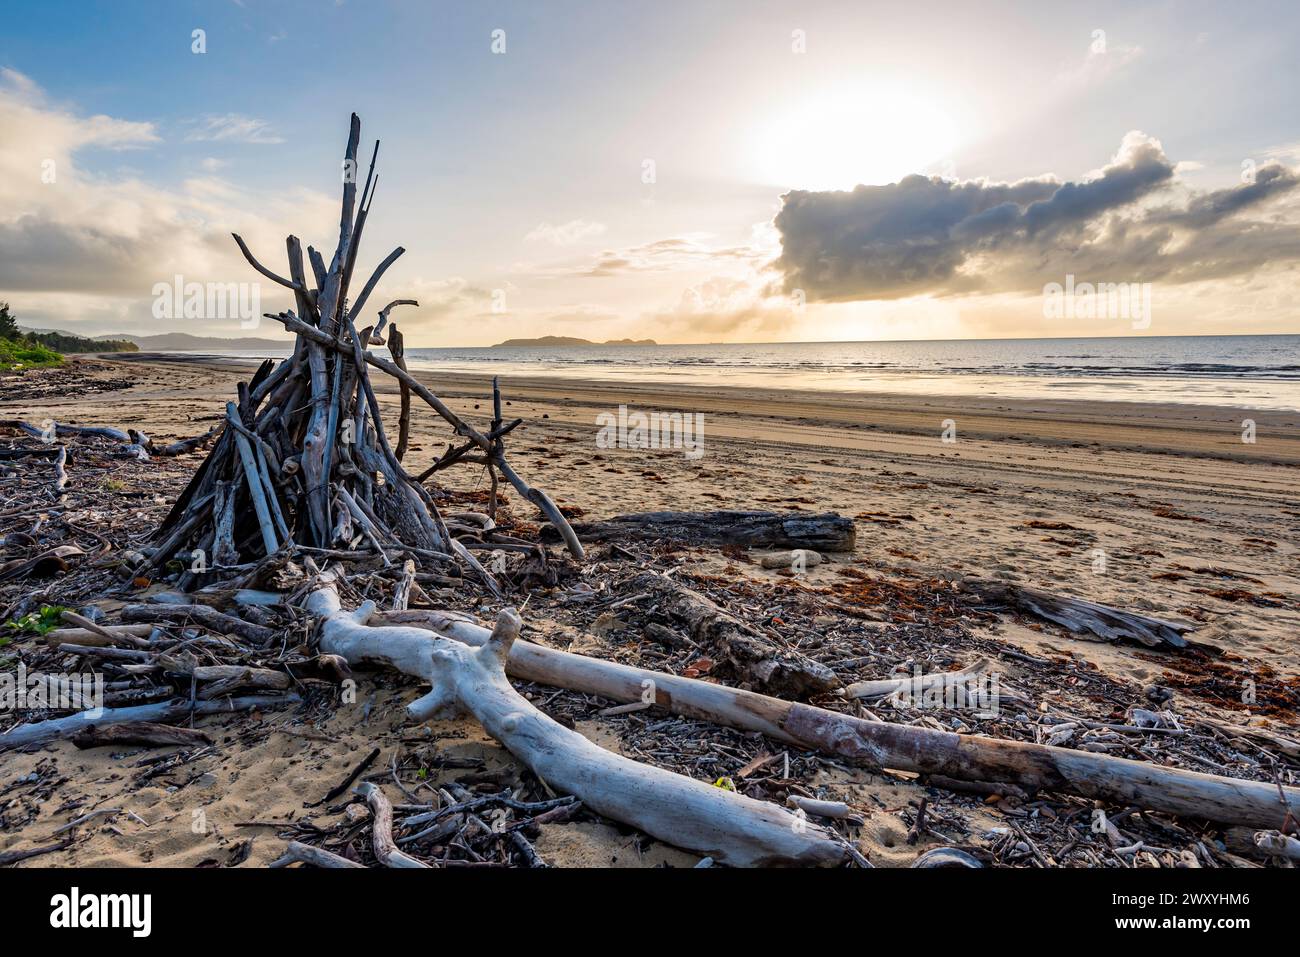 A pile of driftwood staked on a beach teepee style in Far North Queensland, Australia in the early morning Stock Photo